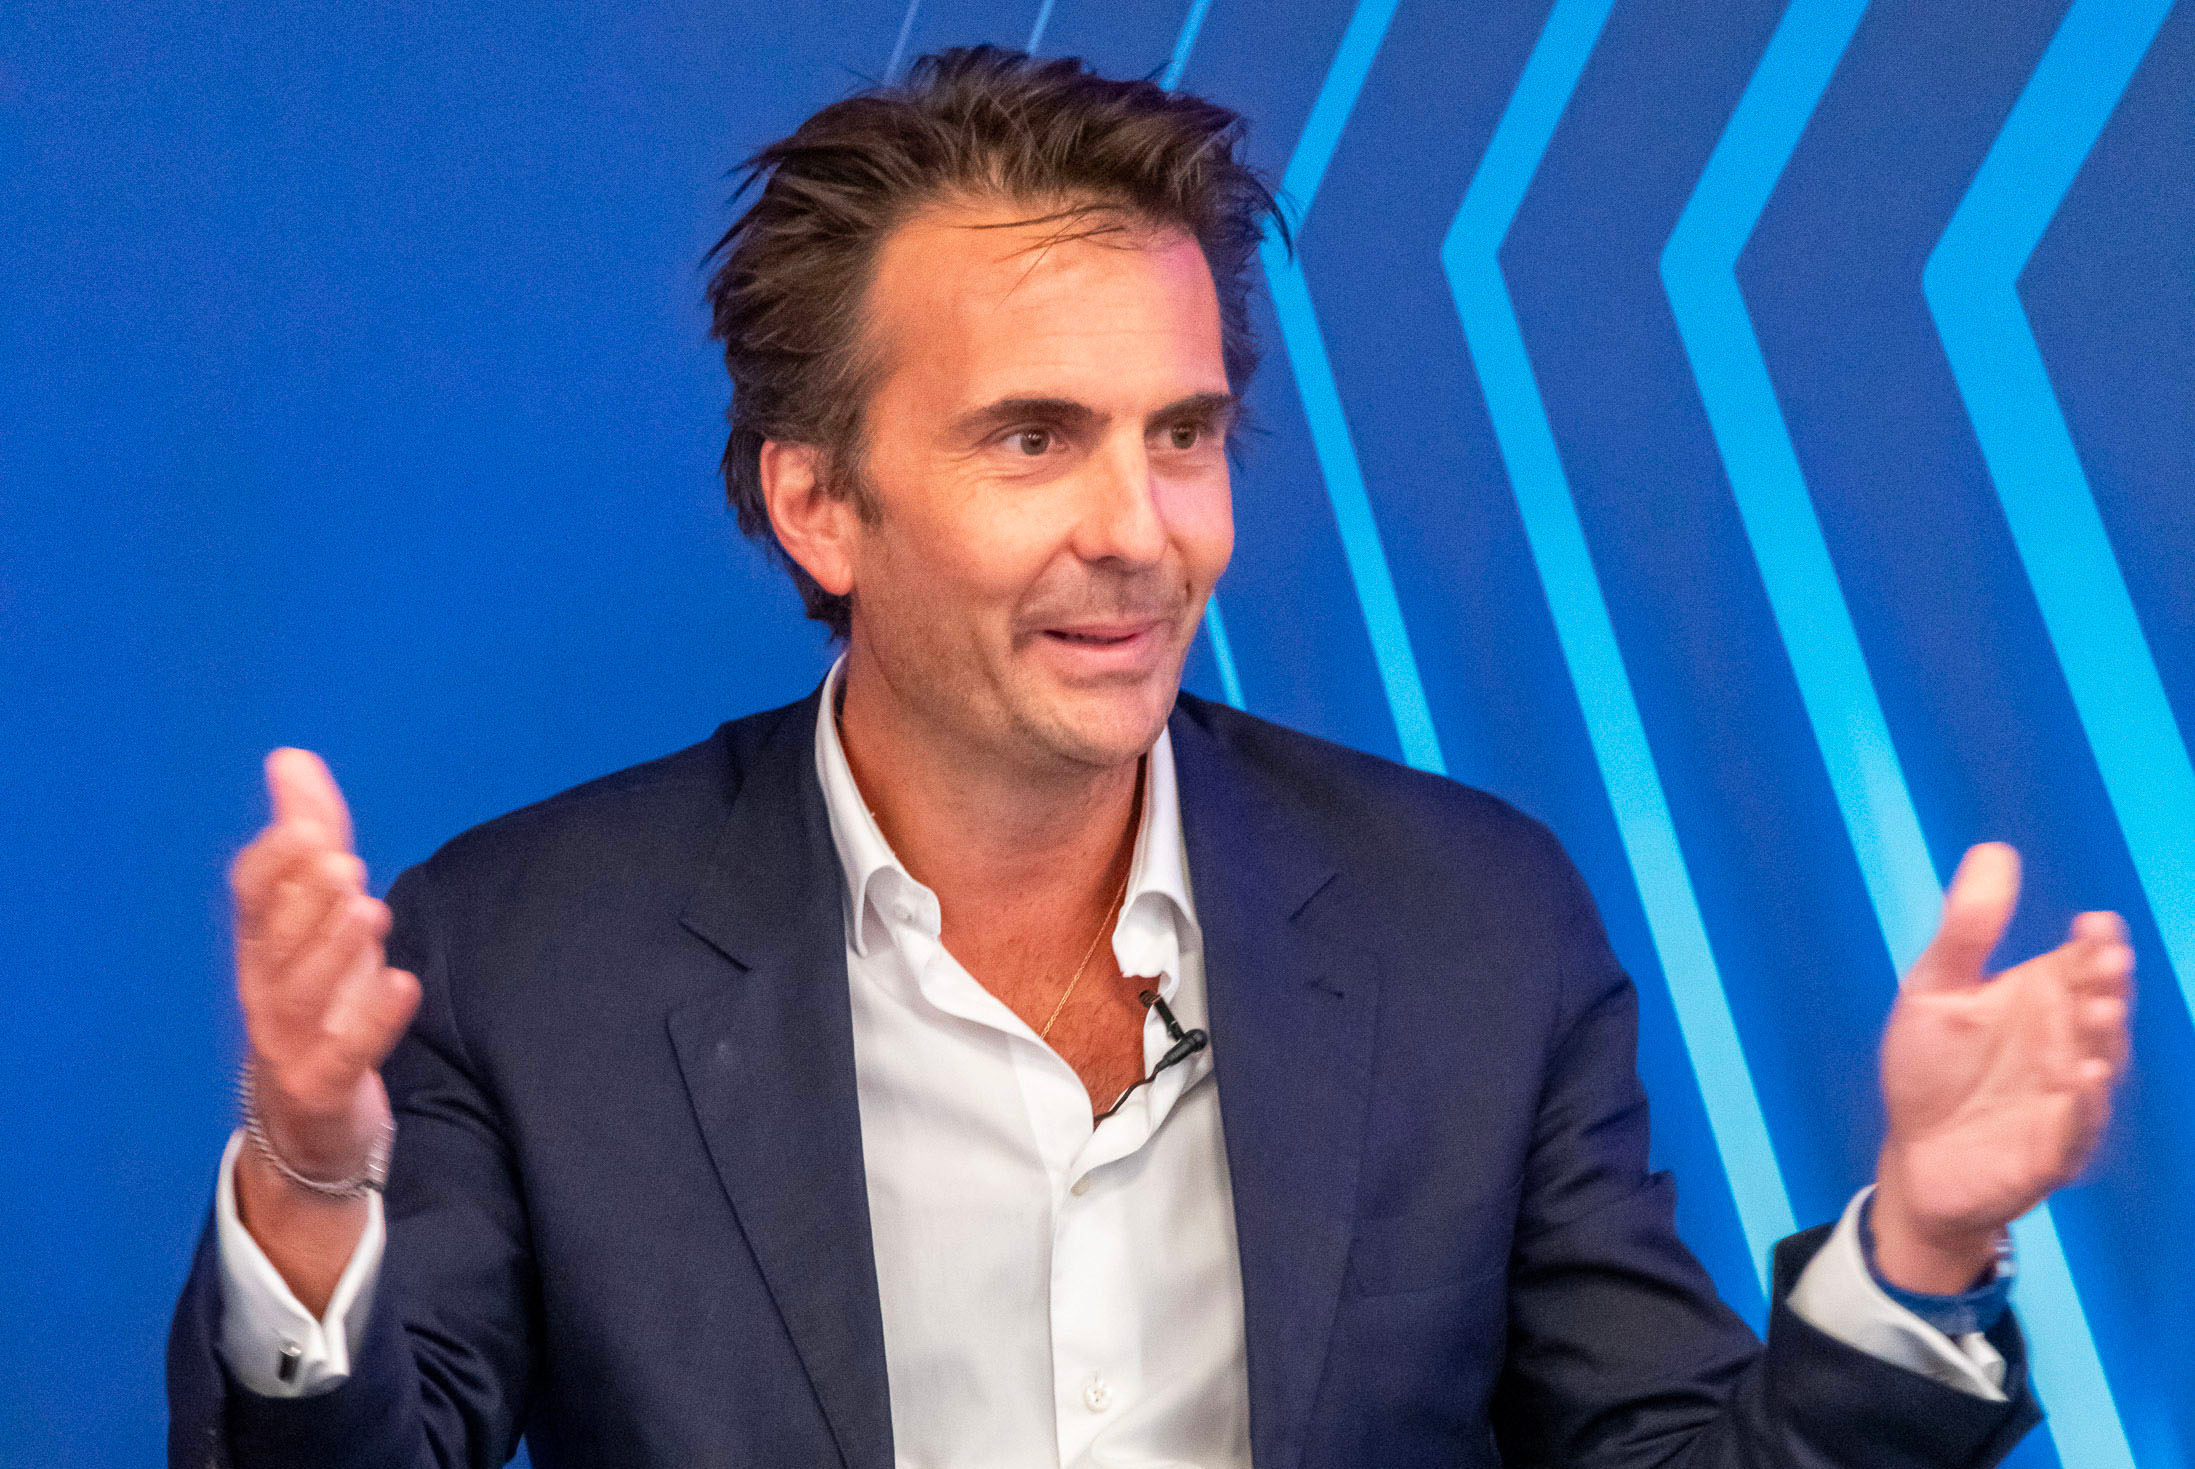 Full interview: Yannick Bolloré at The Future of Media